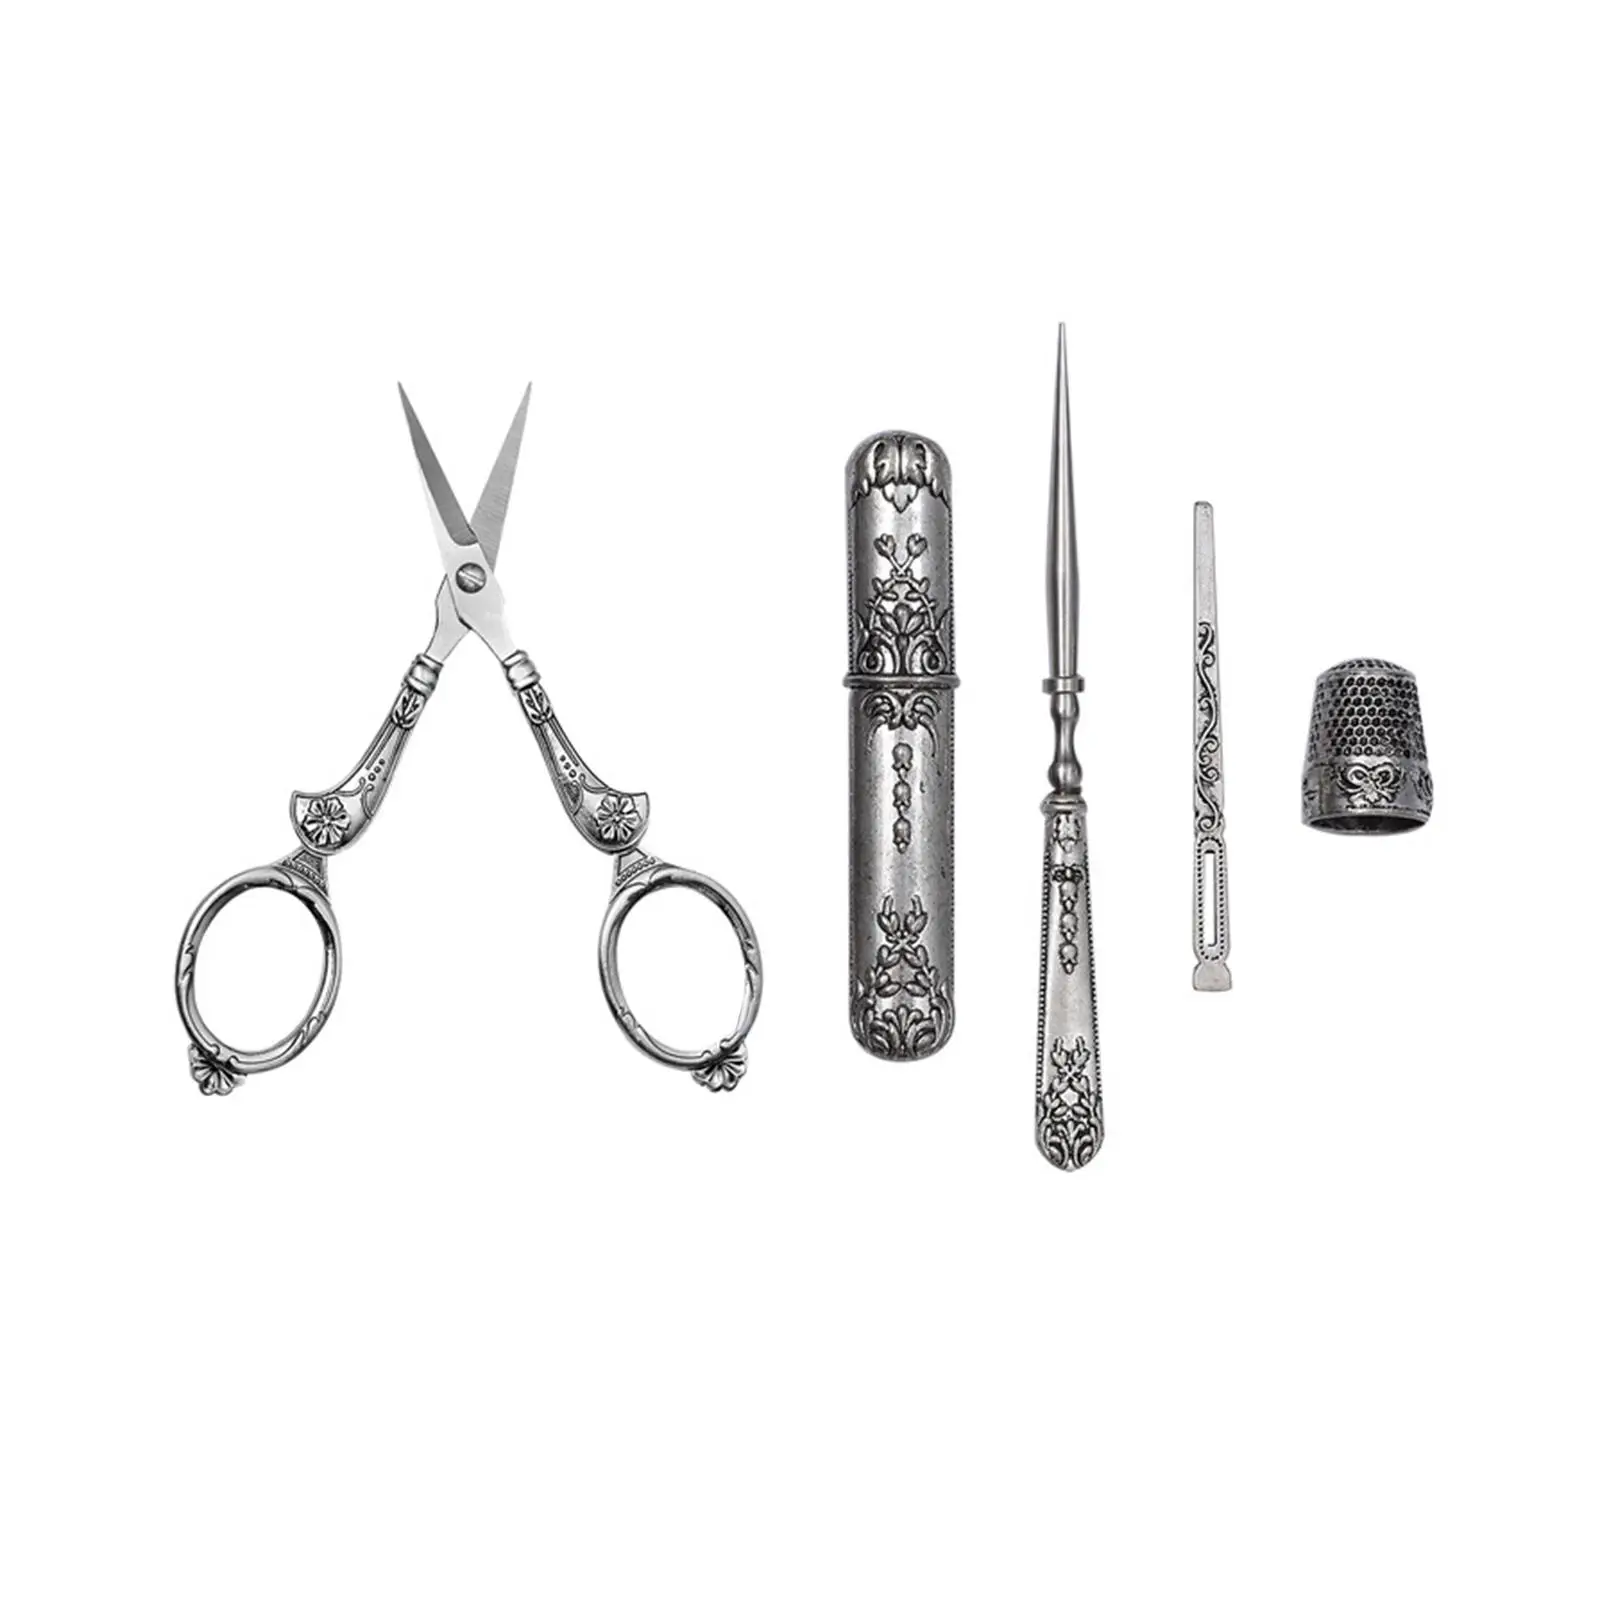 Embroidery Scissors Kit for Hand Making Accessories Craft Supplies Household